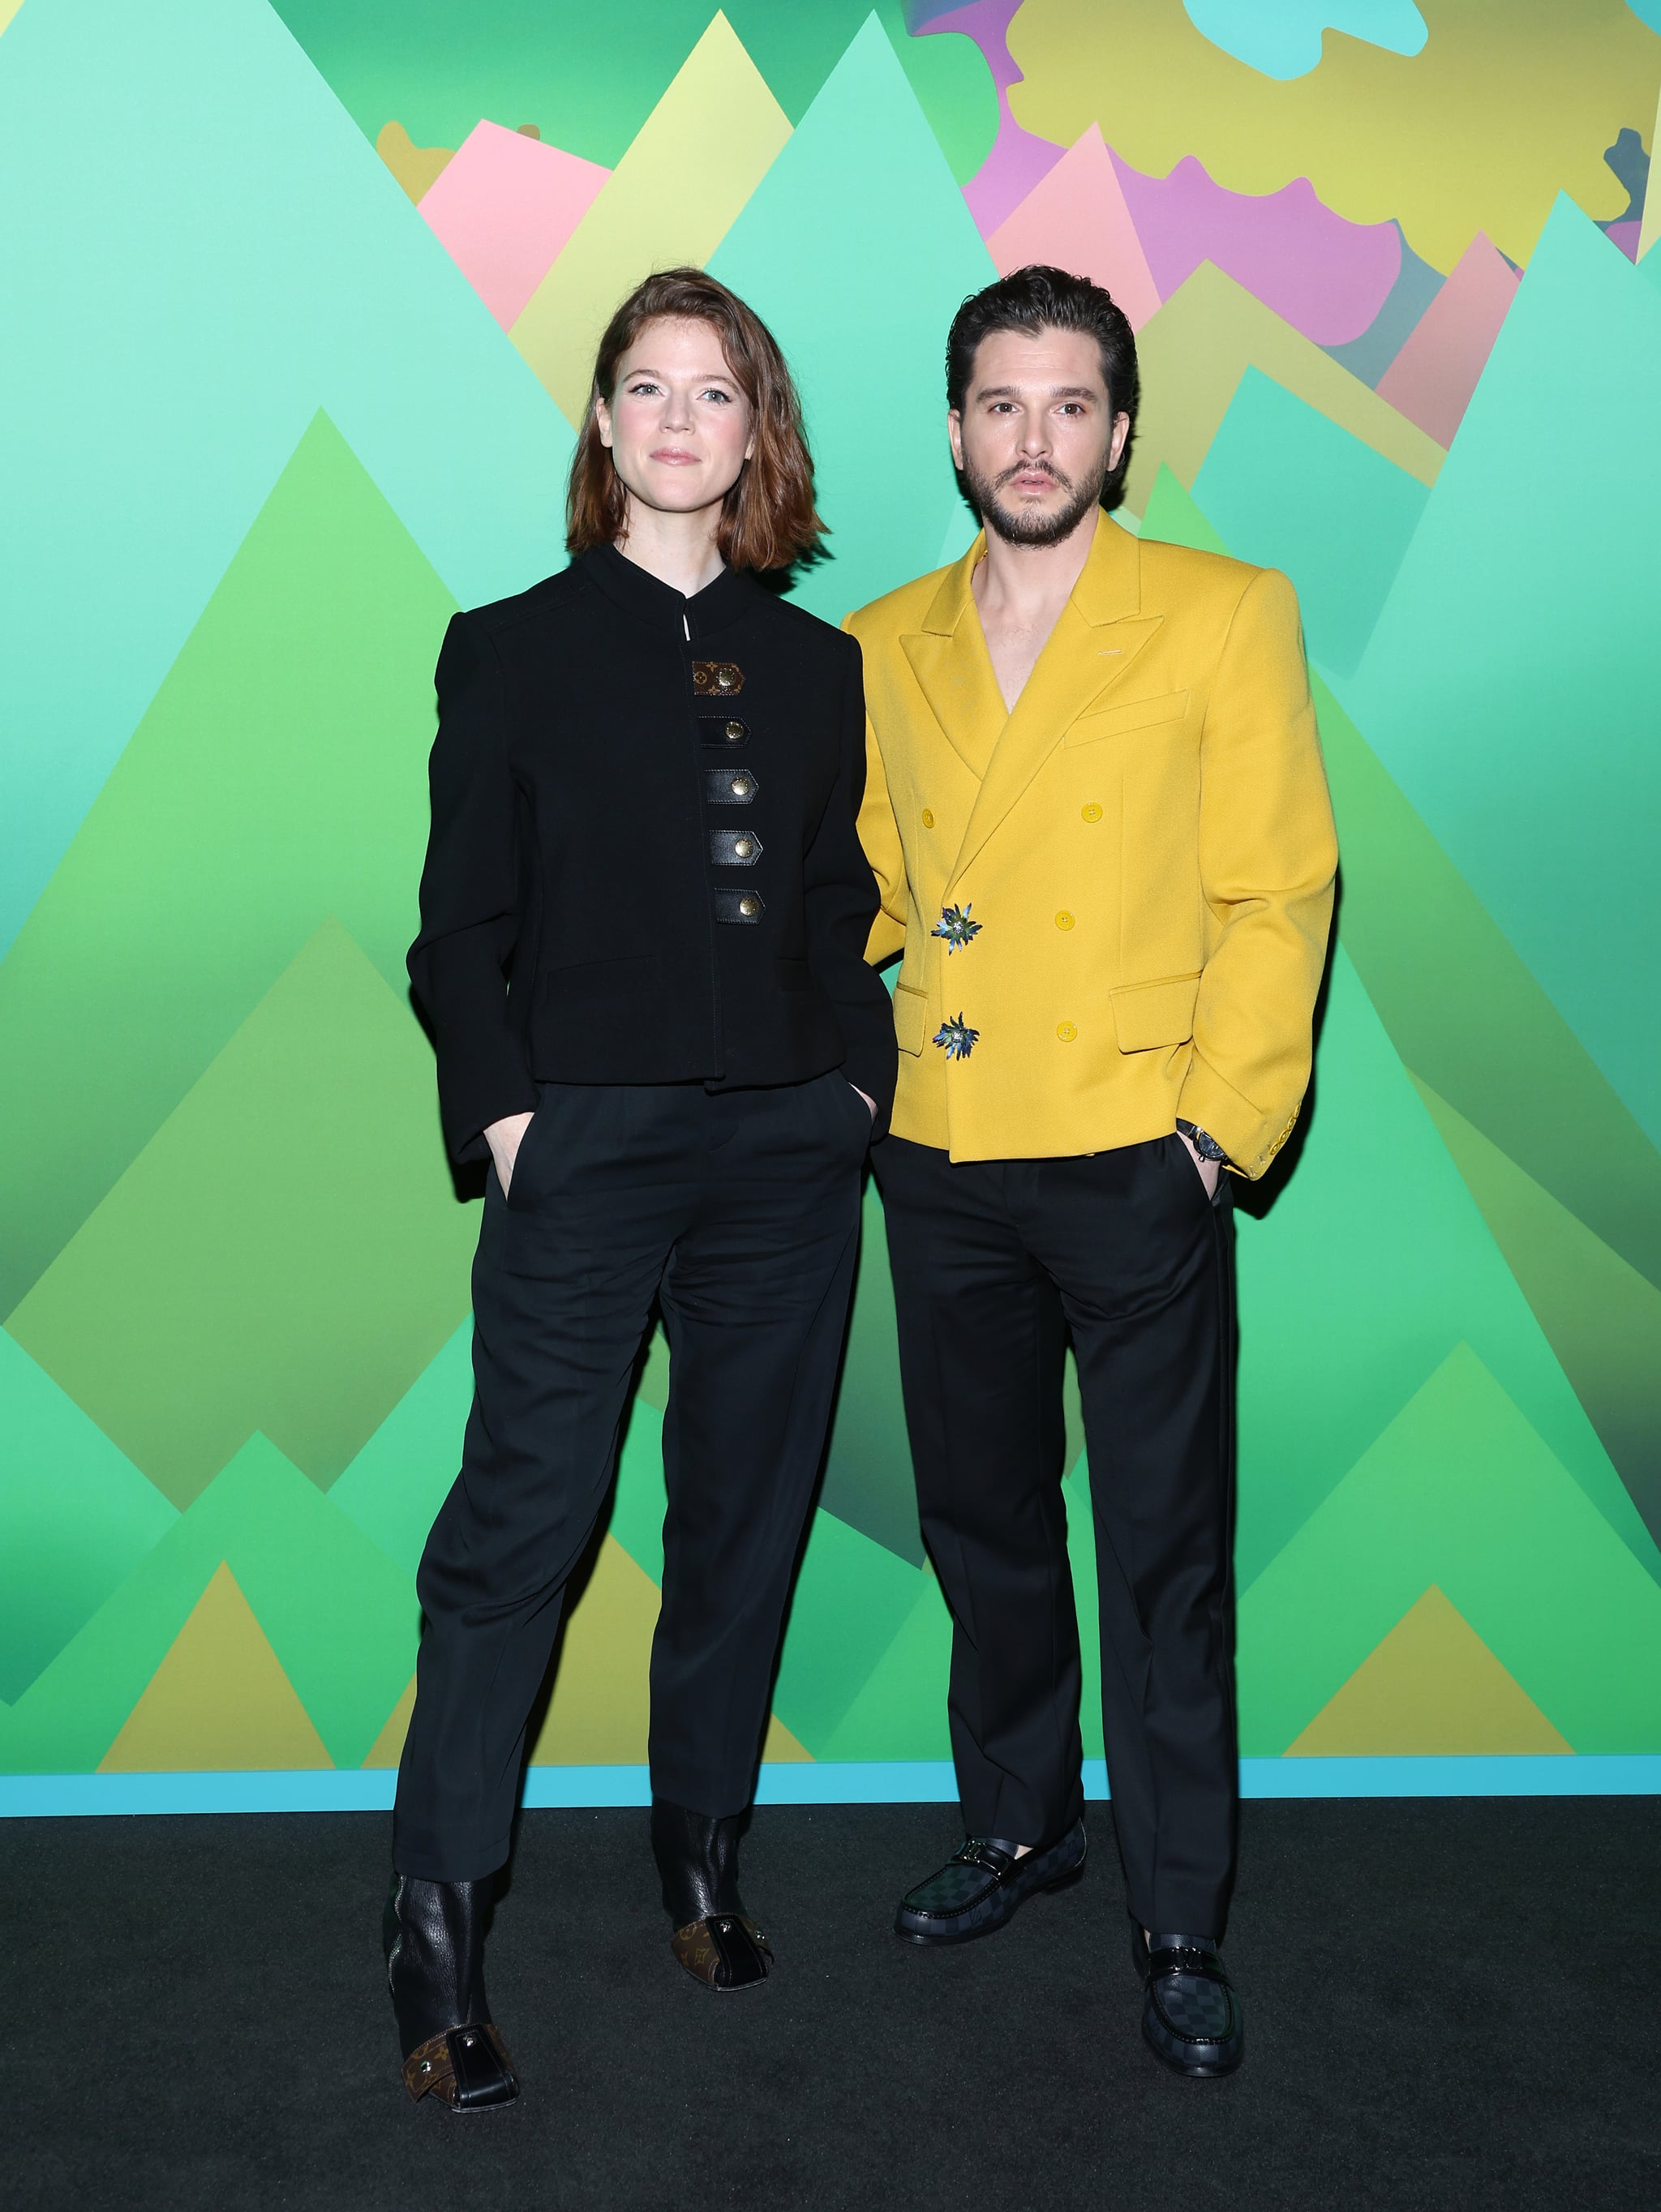 Rosalía at the Louis Vuitton Menswear Fall 2023 Show, Heartstopper's Kit  Connor Cements his Fashion Status at the Loewe Show in Leather Joggers